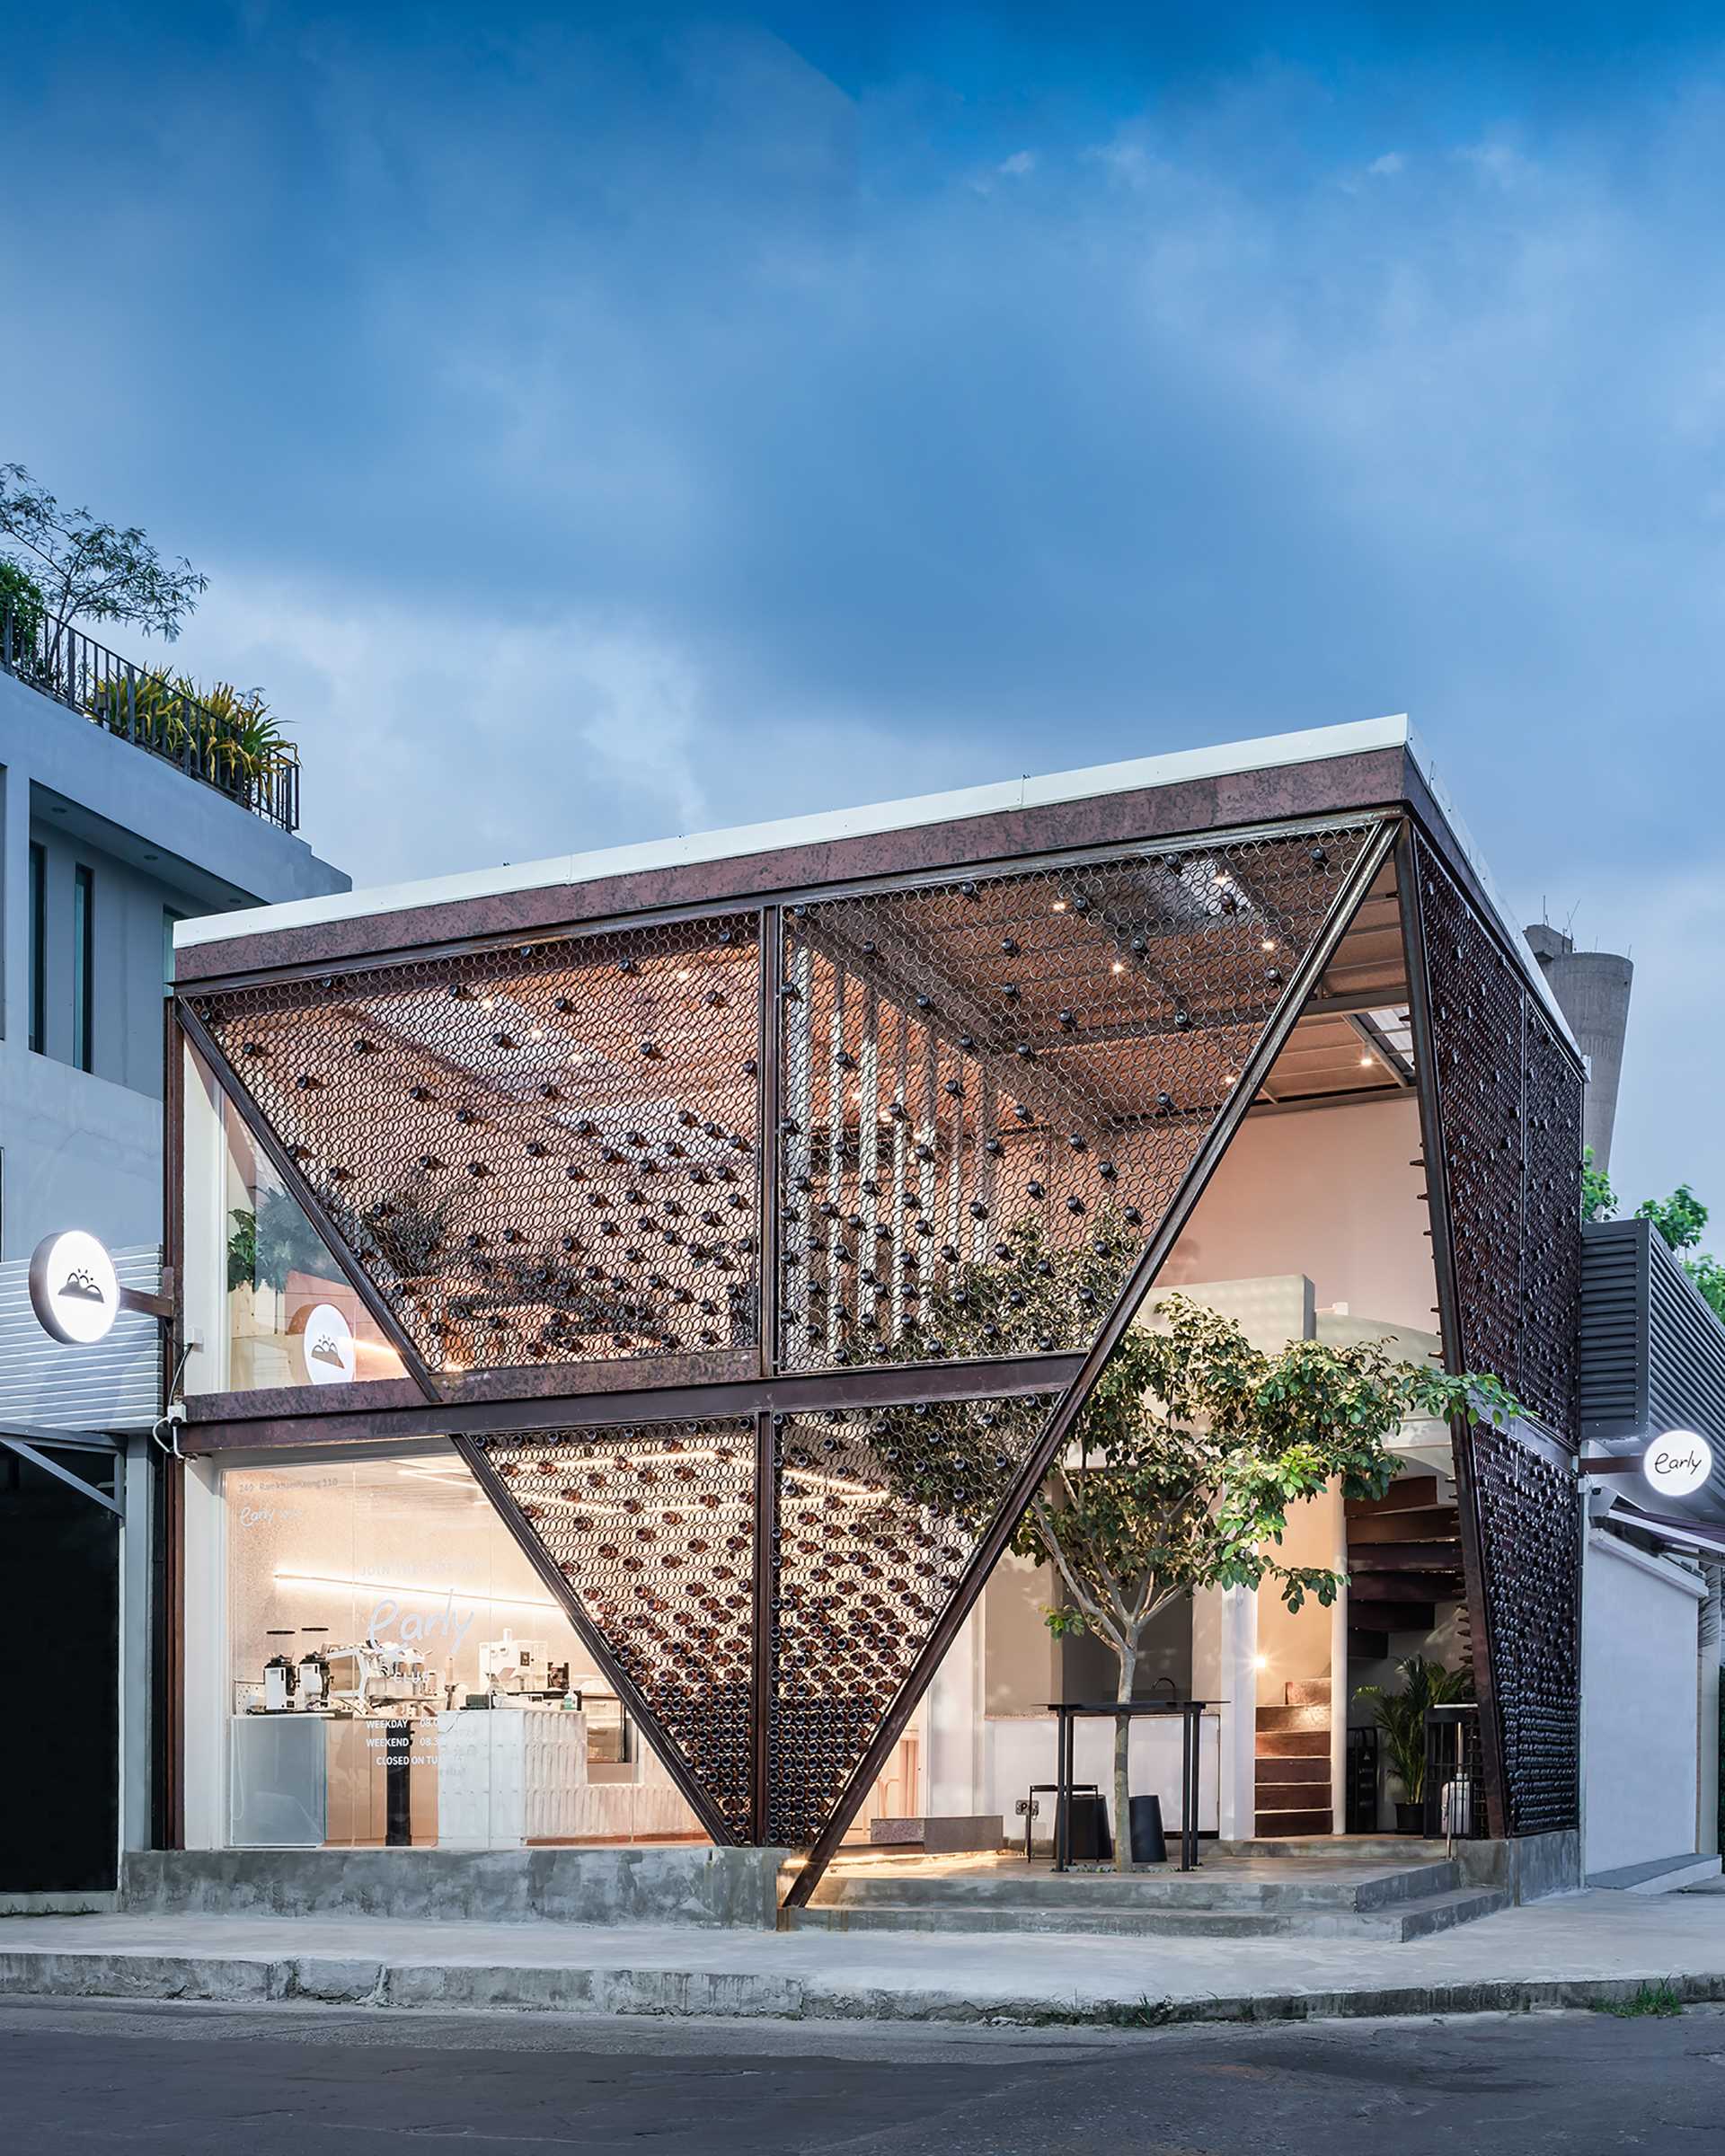 A modern cafe with a facade that features metal rings that hold recycled beer bottles.